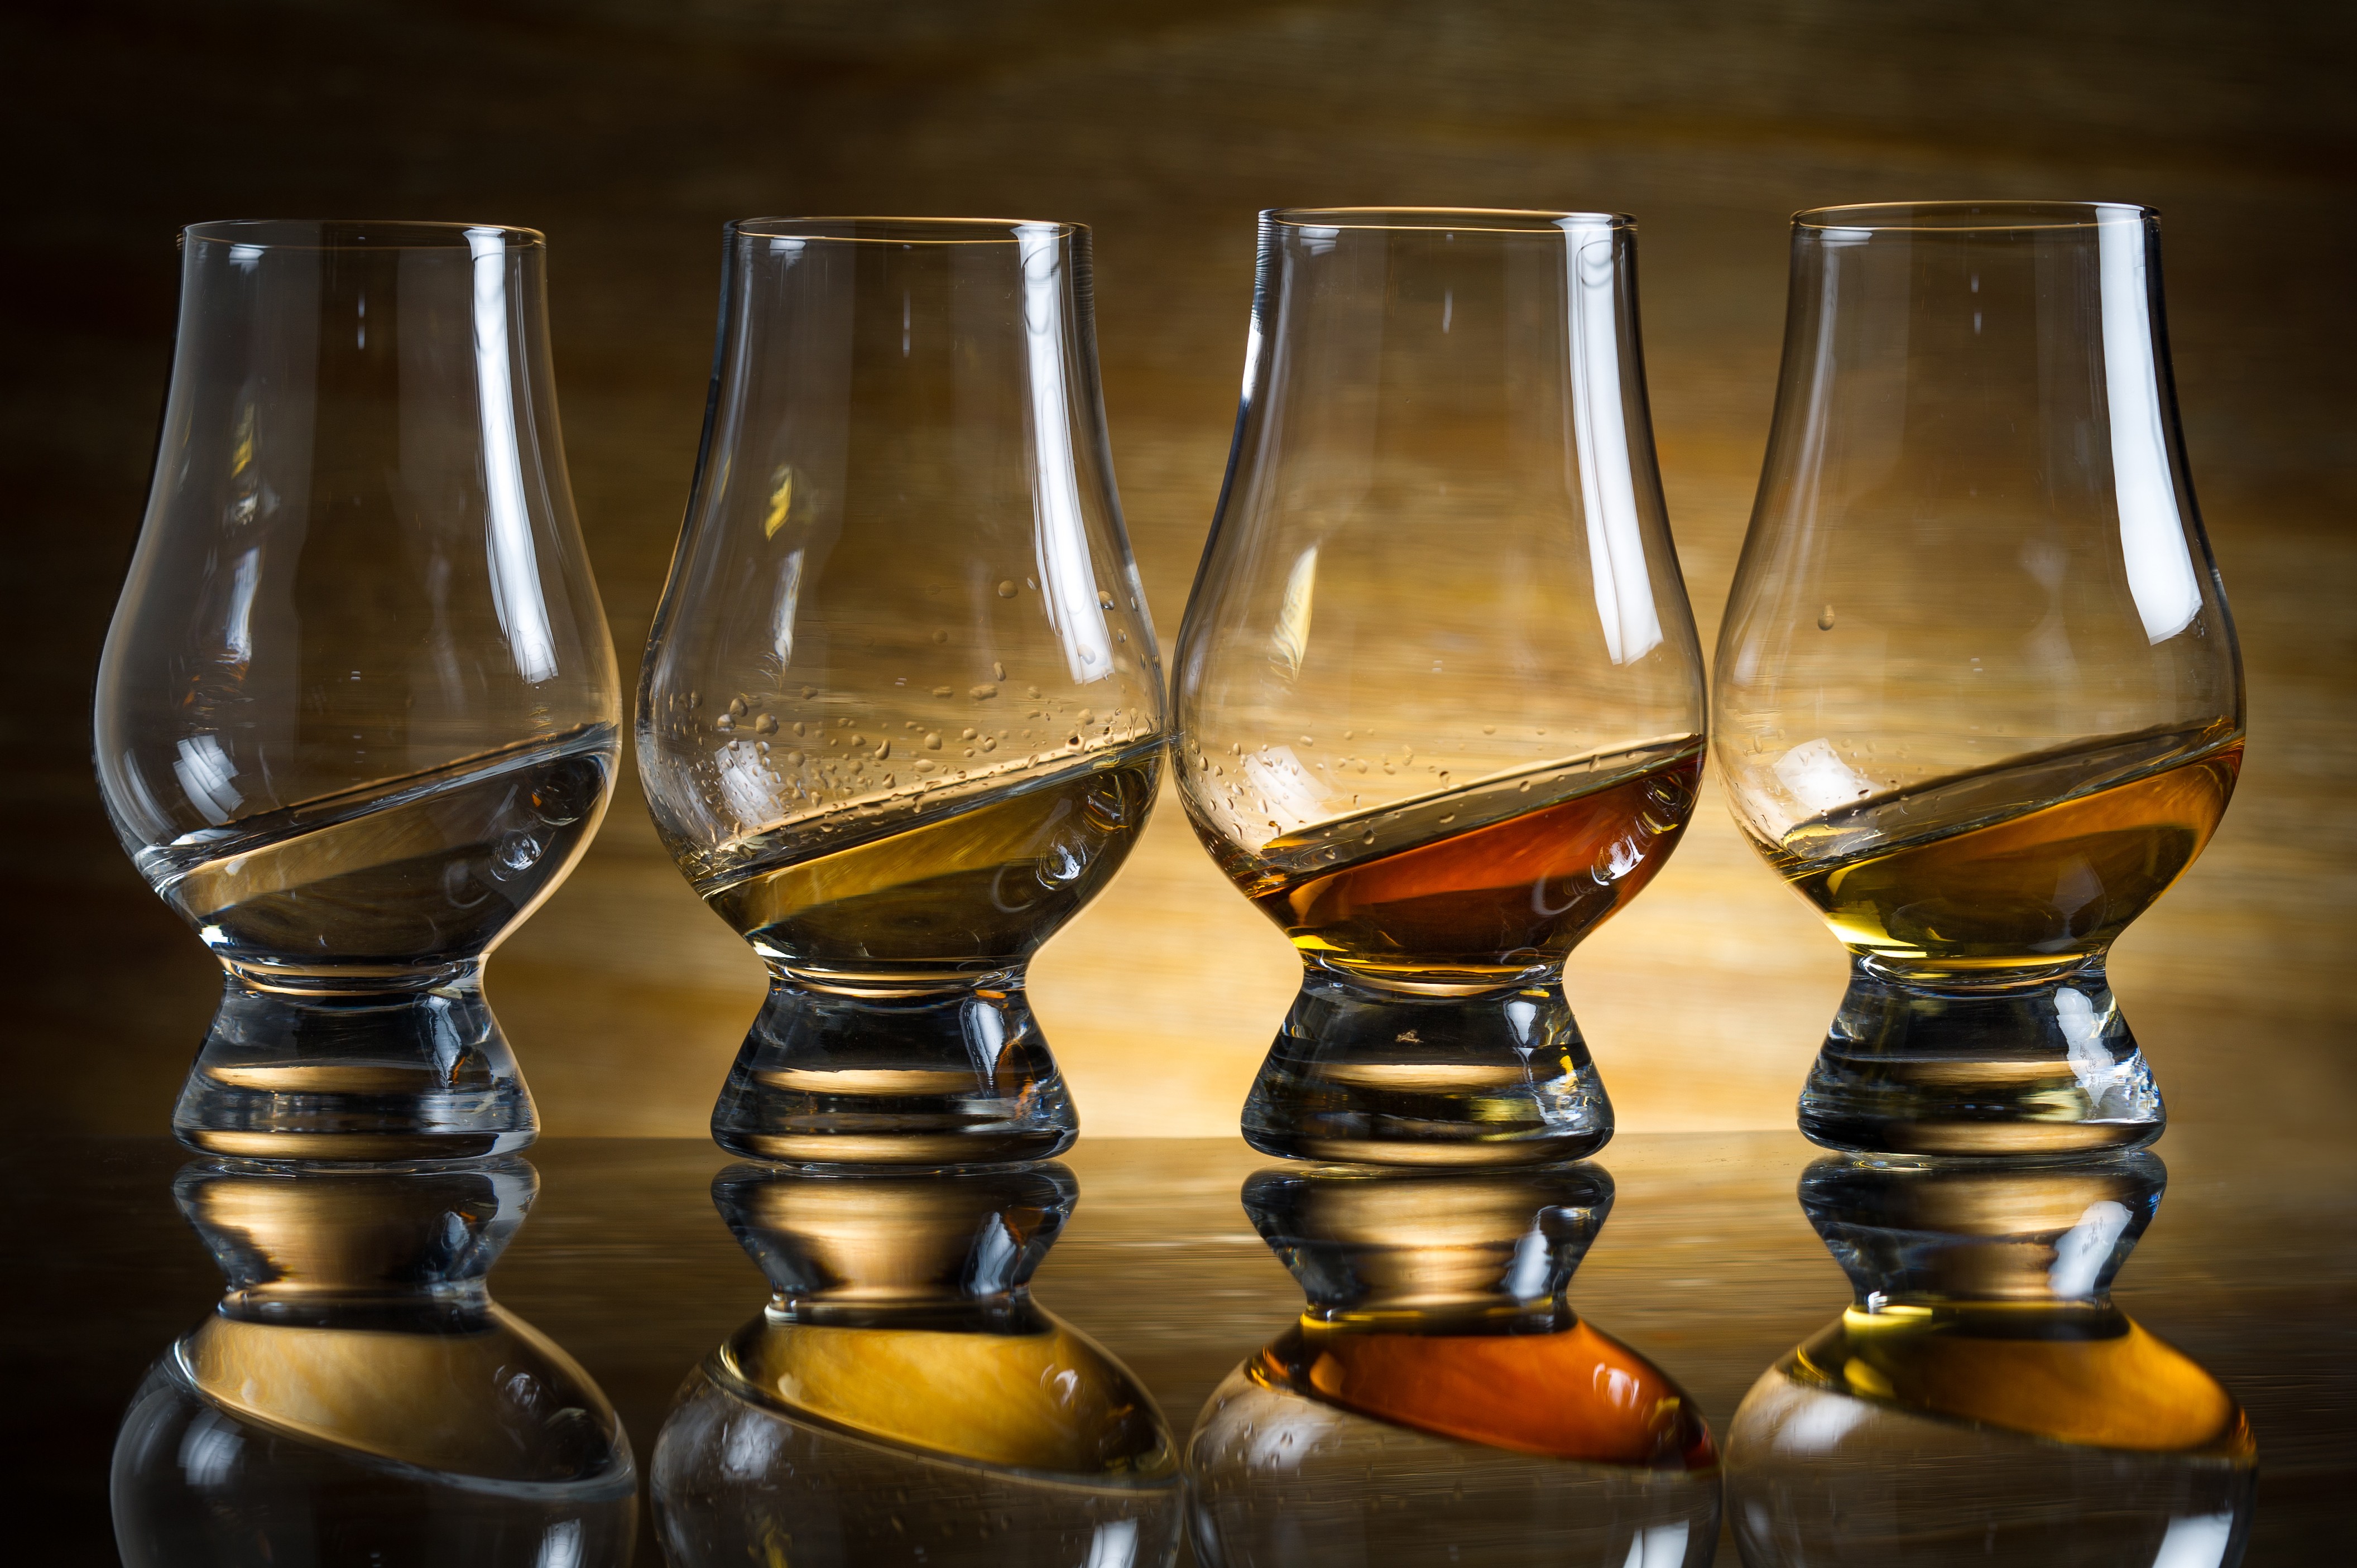 Scientists at Heidelberg University in Germany have invented a ‘tongue’ that can distinguish between two nearly identical whisky samples and identify malt status, age, and country of origin